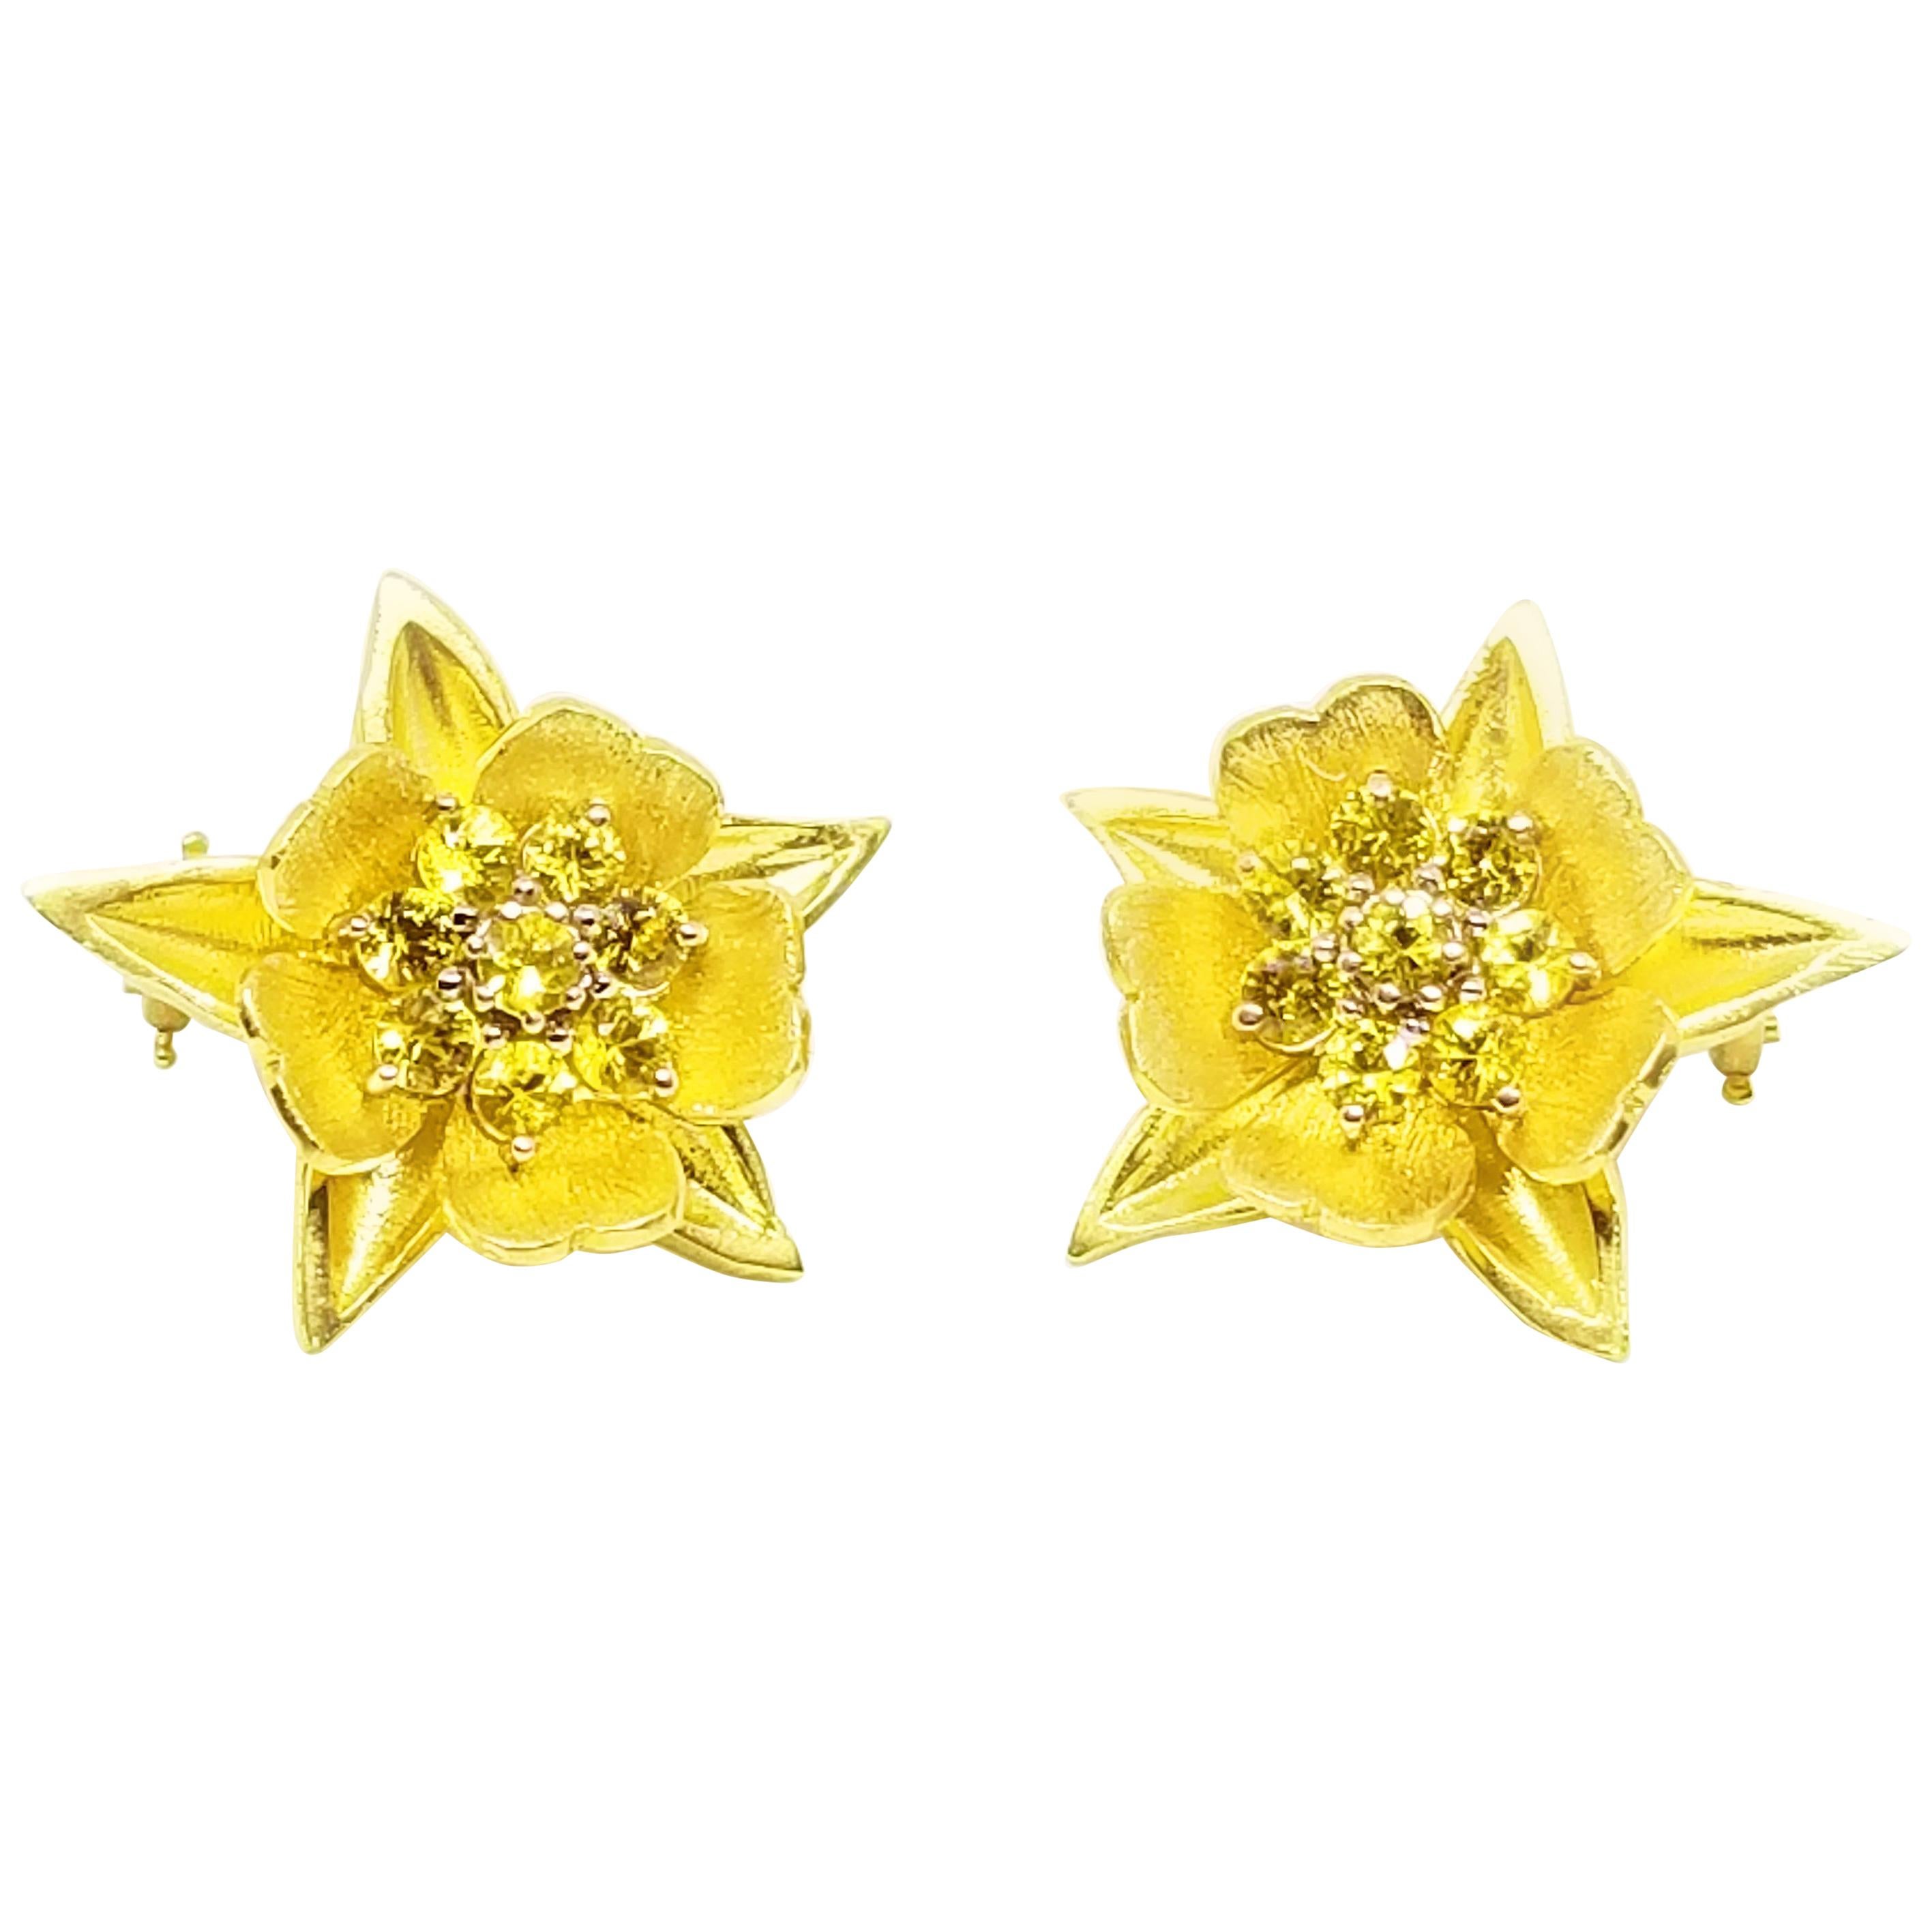 These Substantial Earrings are One of a Kind in 18K Yellow Gold featuring faceted, clusters of Round Brilliant Cut Sapphires of matched Canary Yellow Hue and Gem Quality. Each of the eight total Sapphires is prong set within a cluster at the center